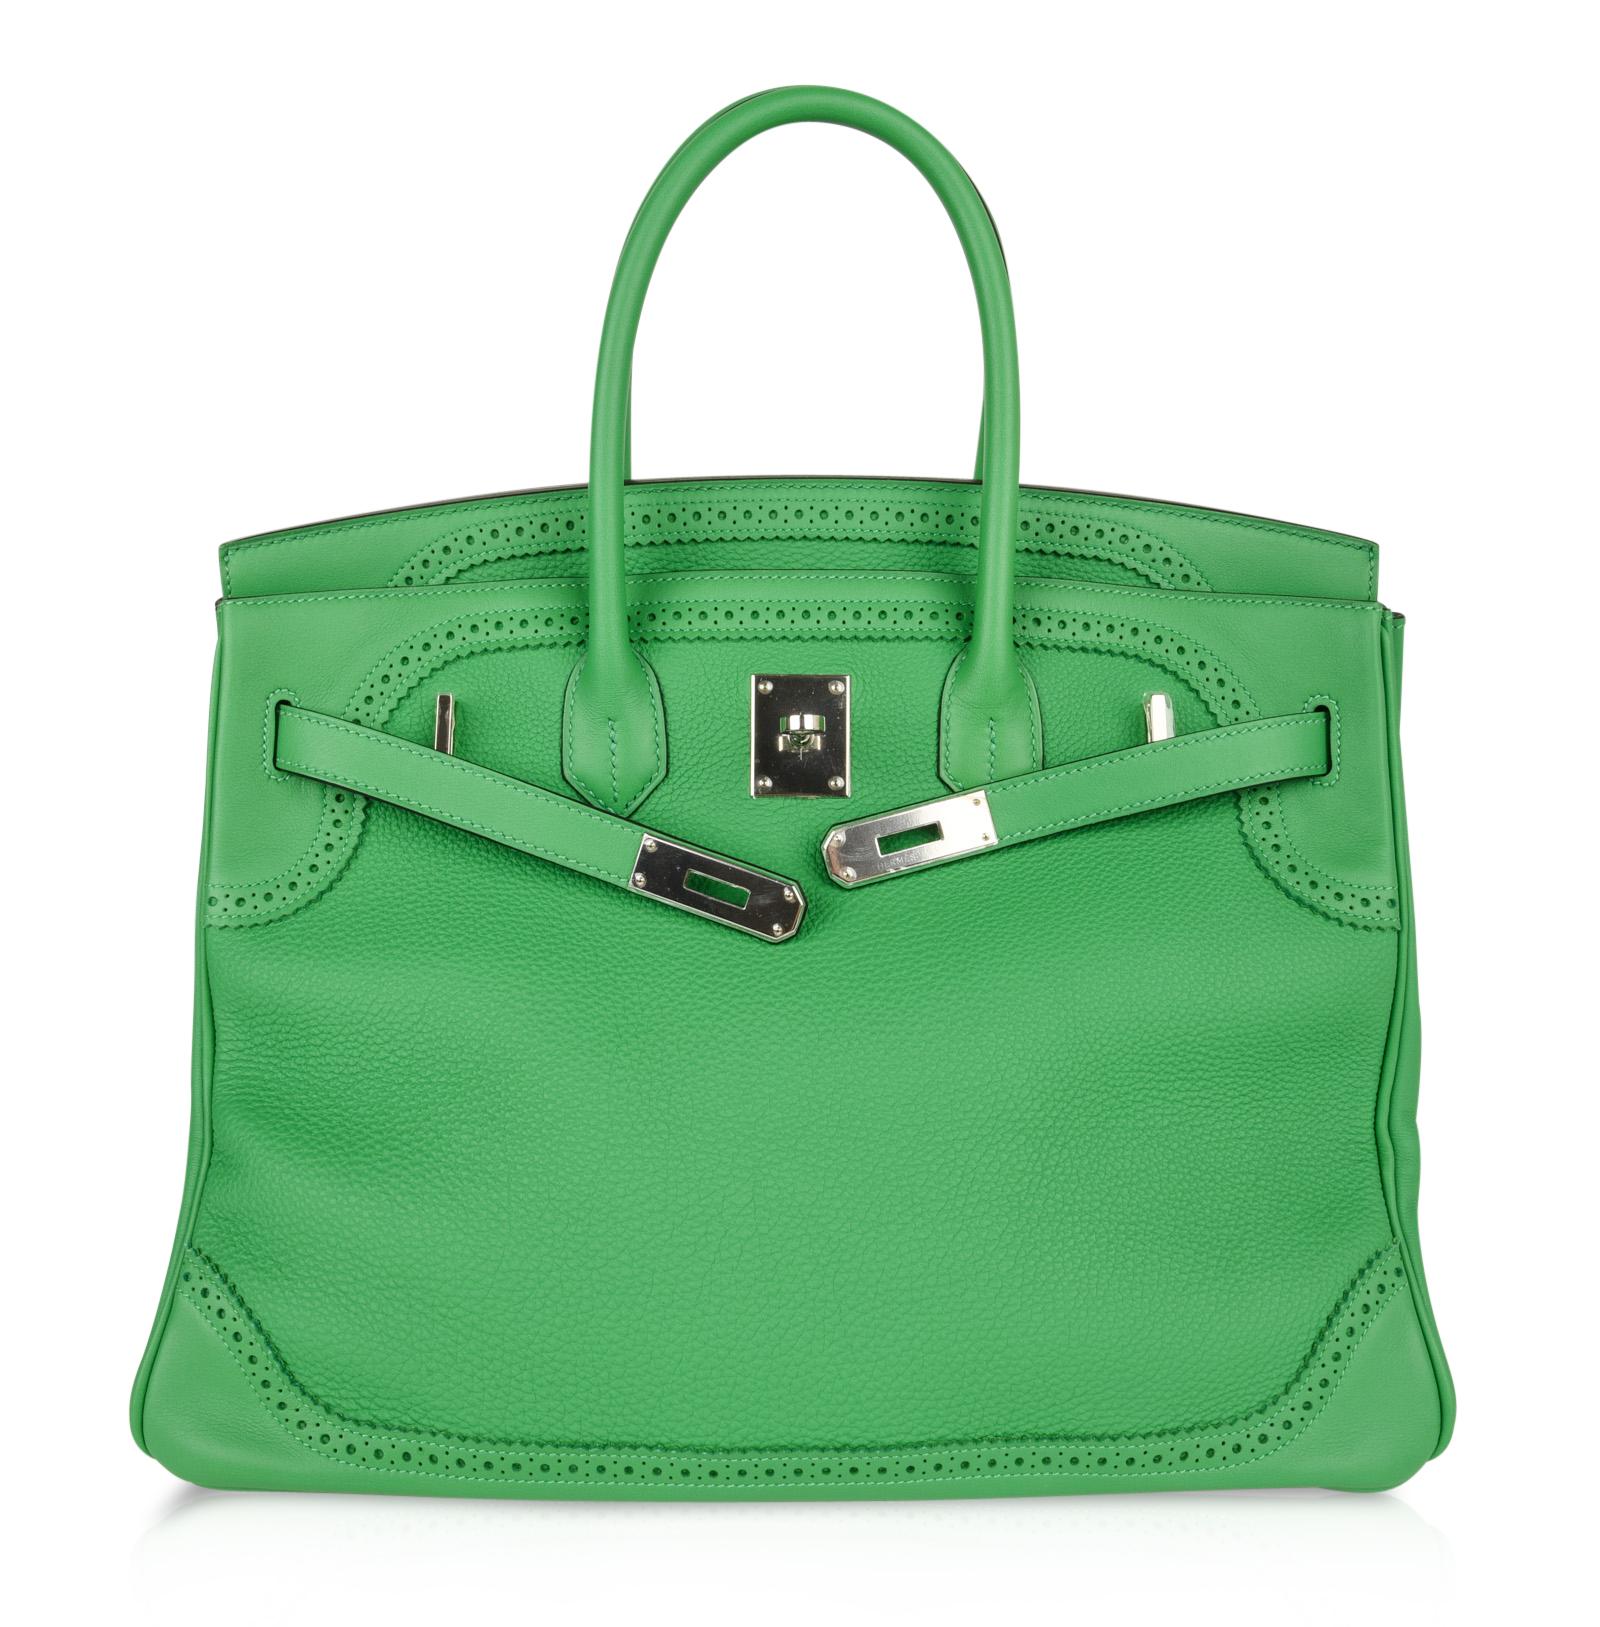 Hermes Birkin 35 Limited Edition Ghillies Bag Rare Bamboo Palladium Hardware In Excellent Condition In Miami, FL